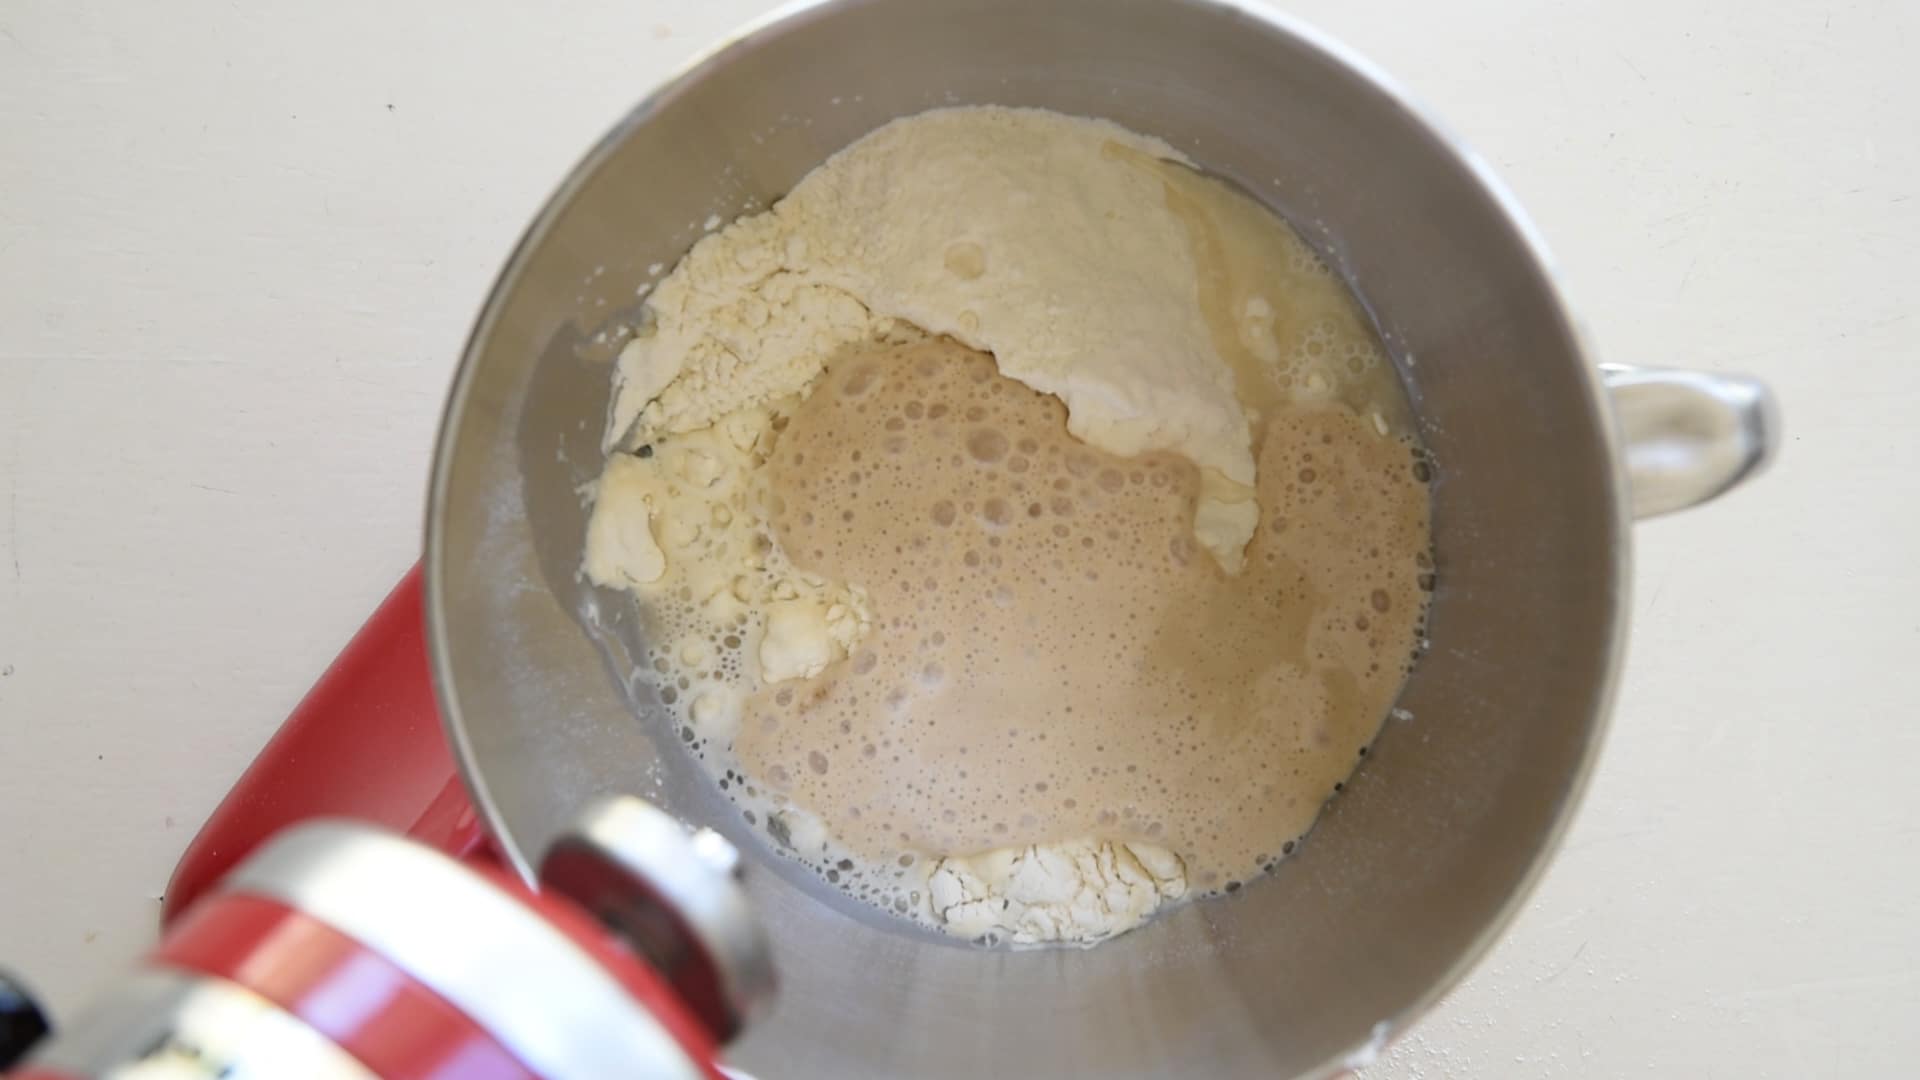 mix activated yeast with remaining flour and water